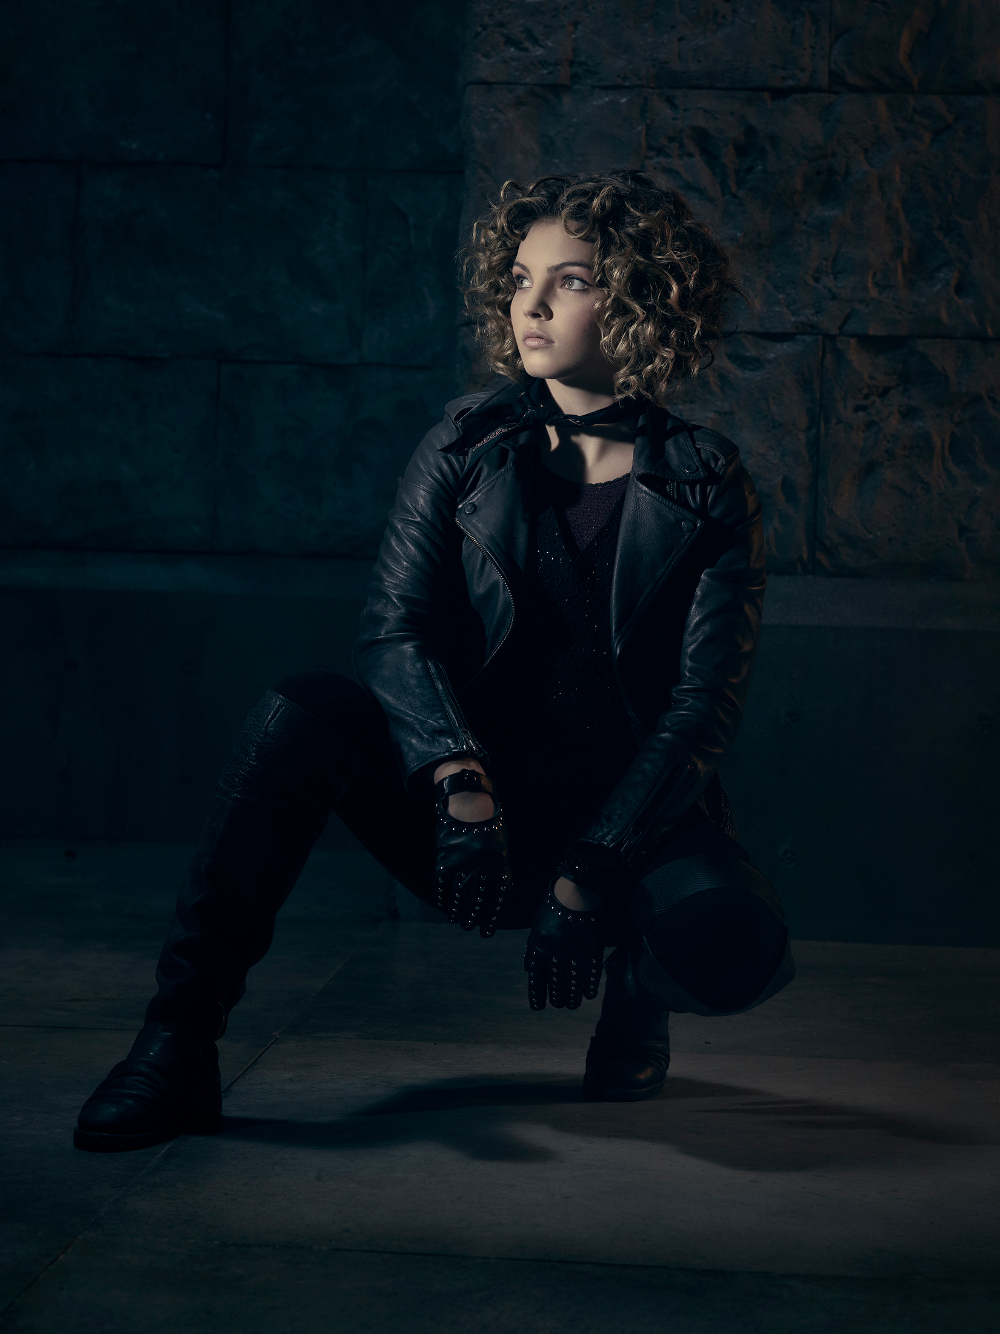 gotham-season-3-synopsis-teases-poison-ivy-and-mad-hatter-plus-character-portraits12.jpg